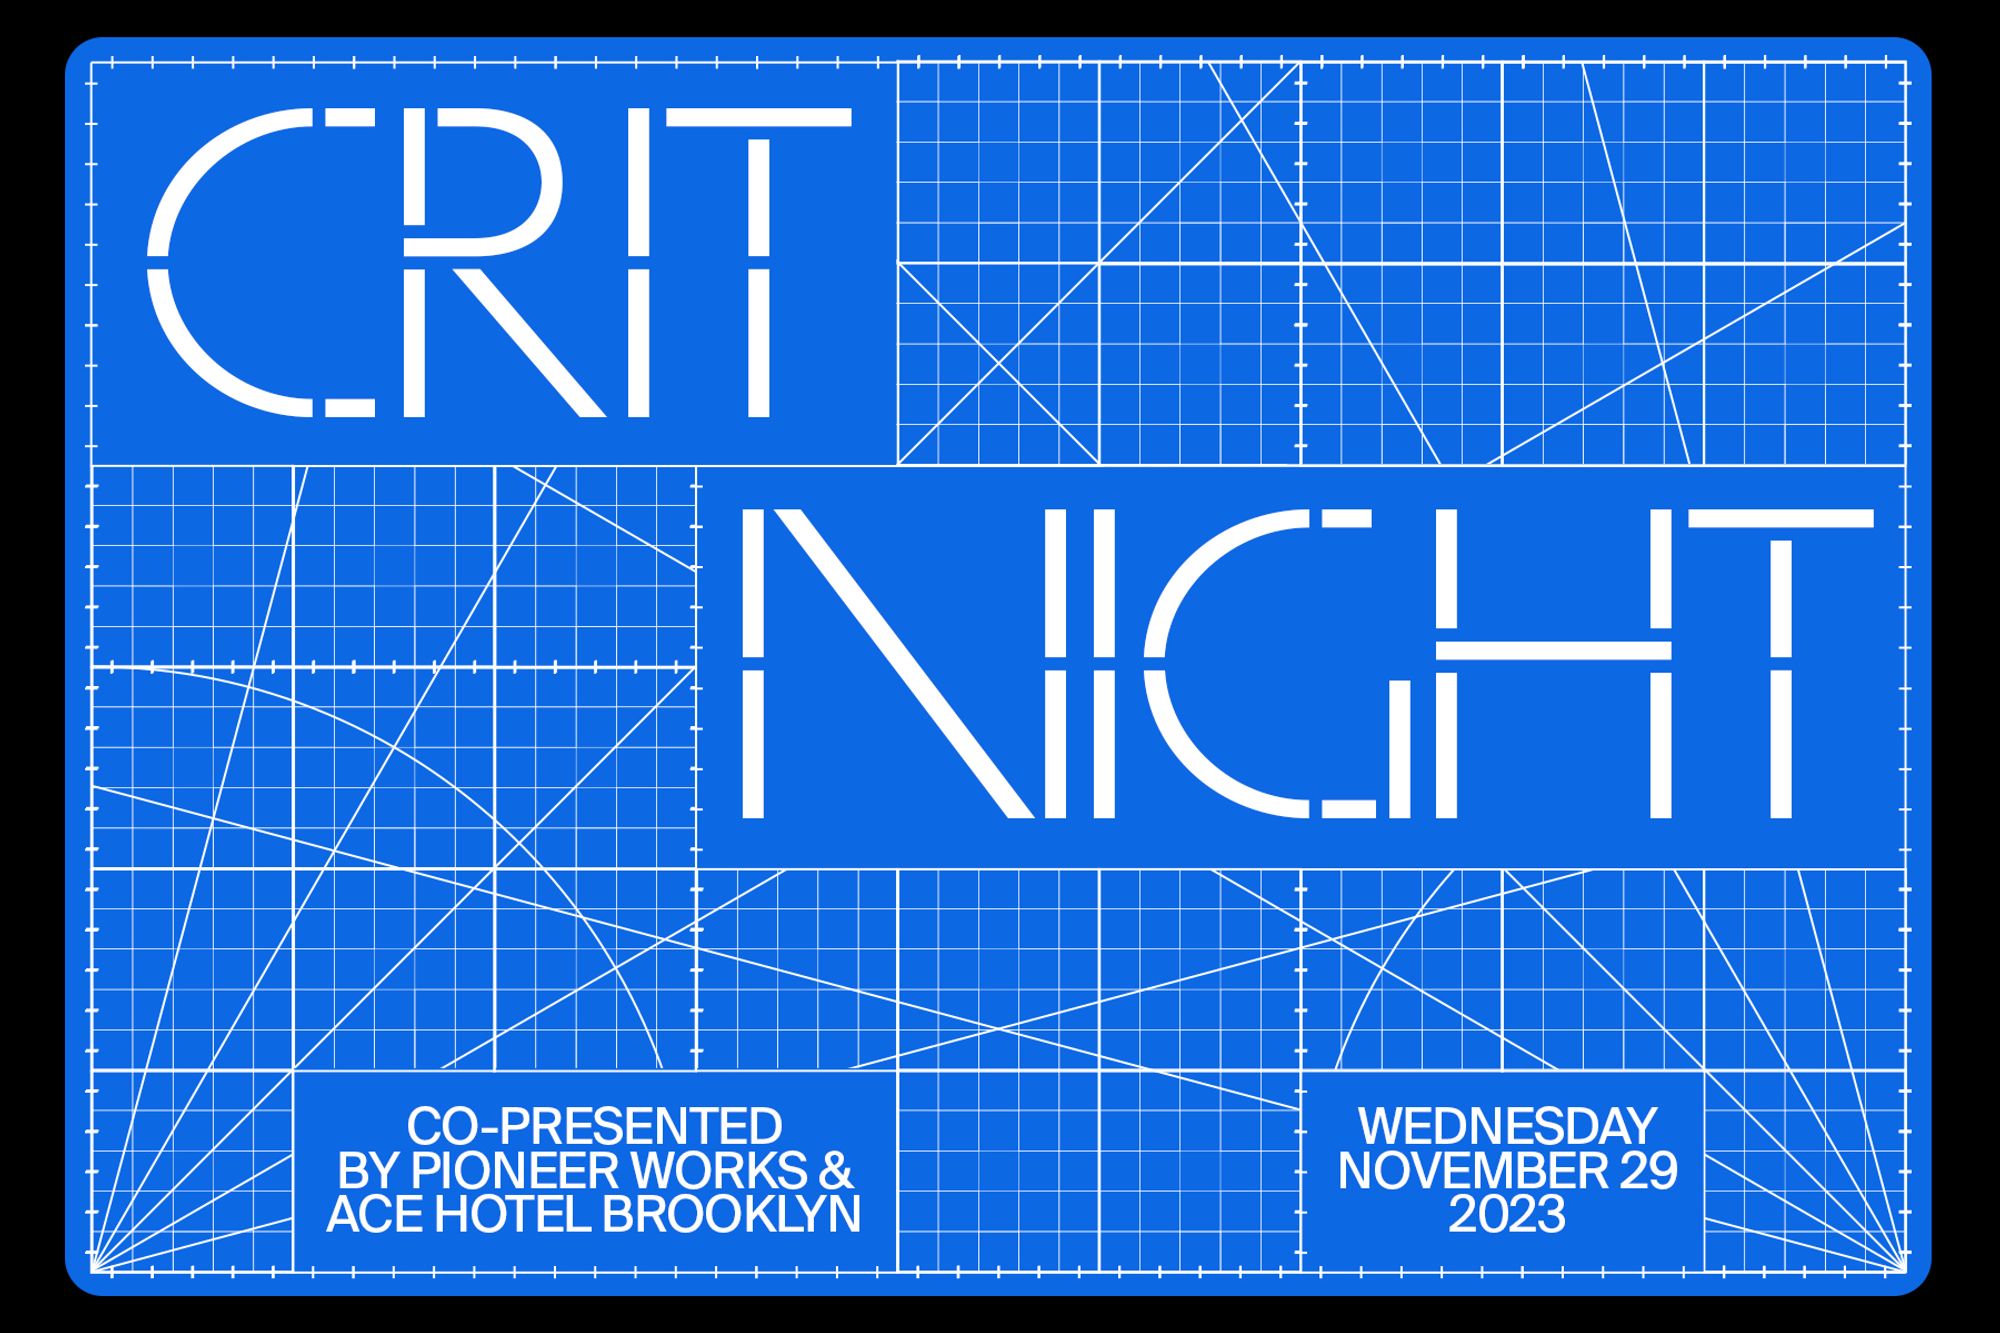 Crit Night at the Ace Hotel Brooklyn